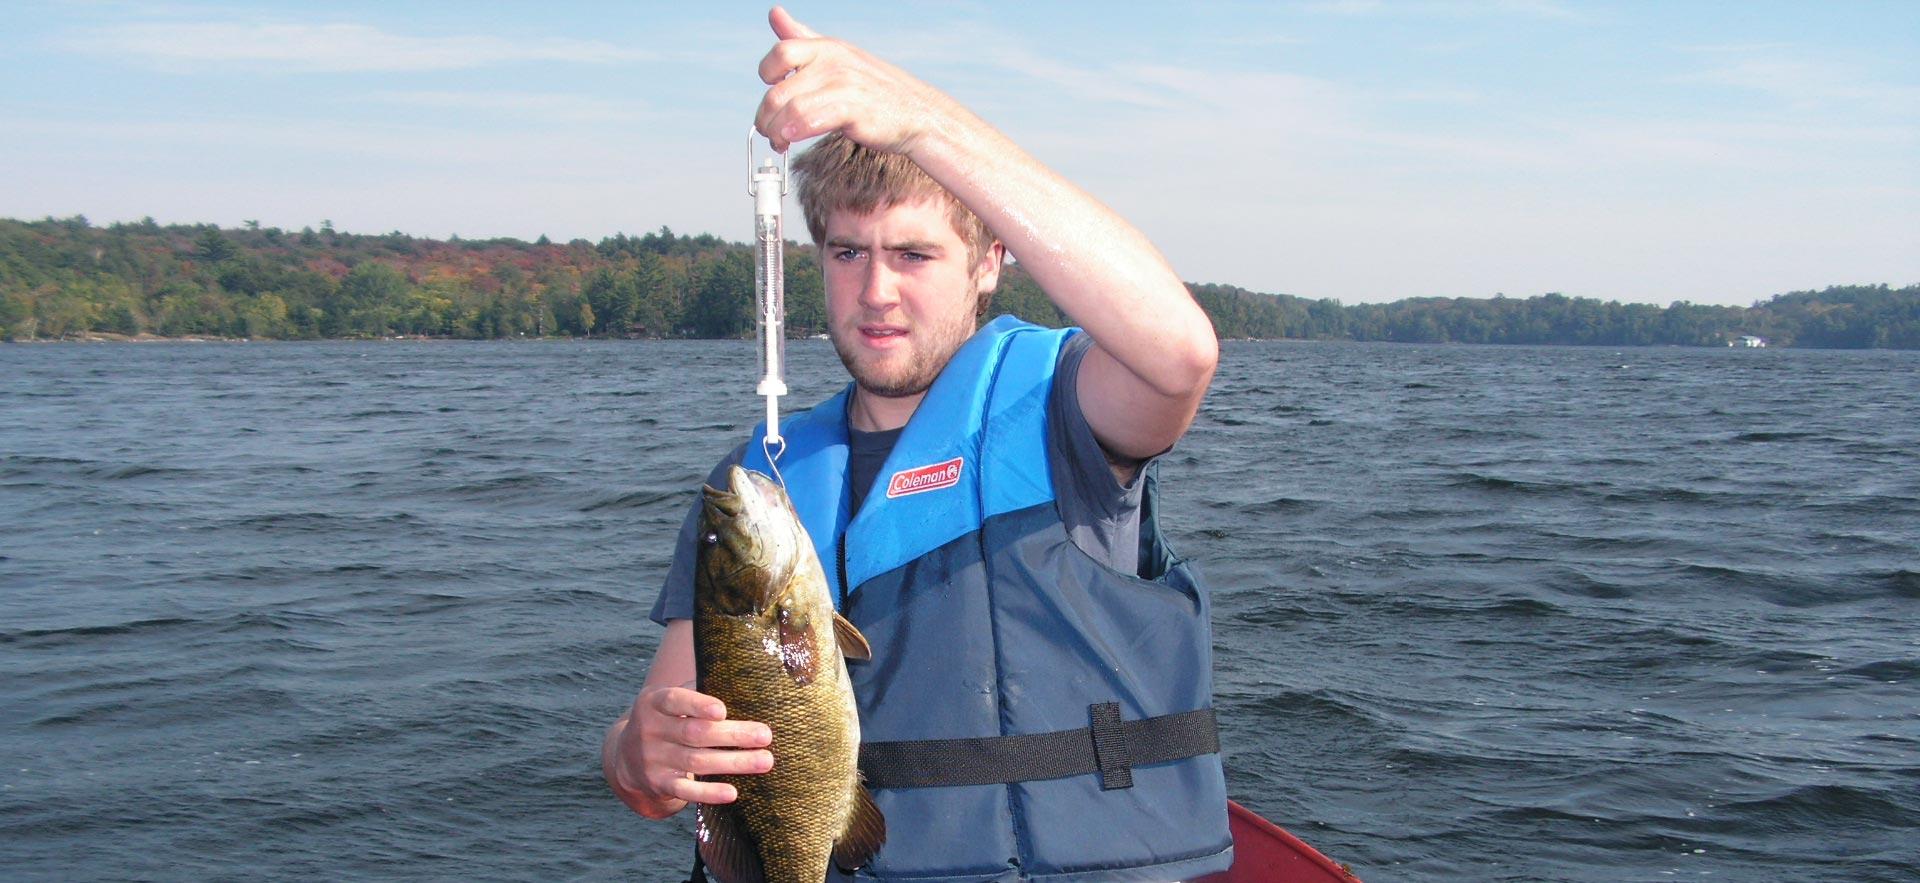 A male Fish and Wildlife student weighs a fish.